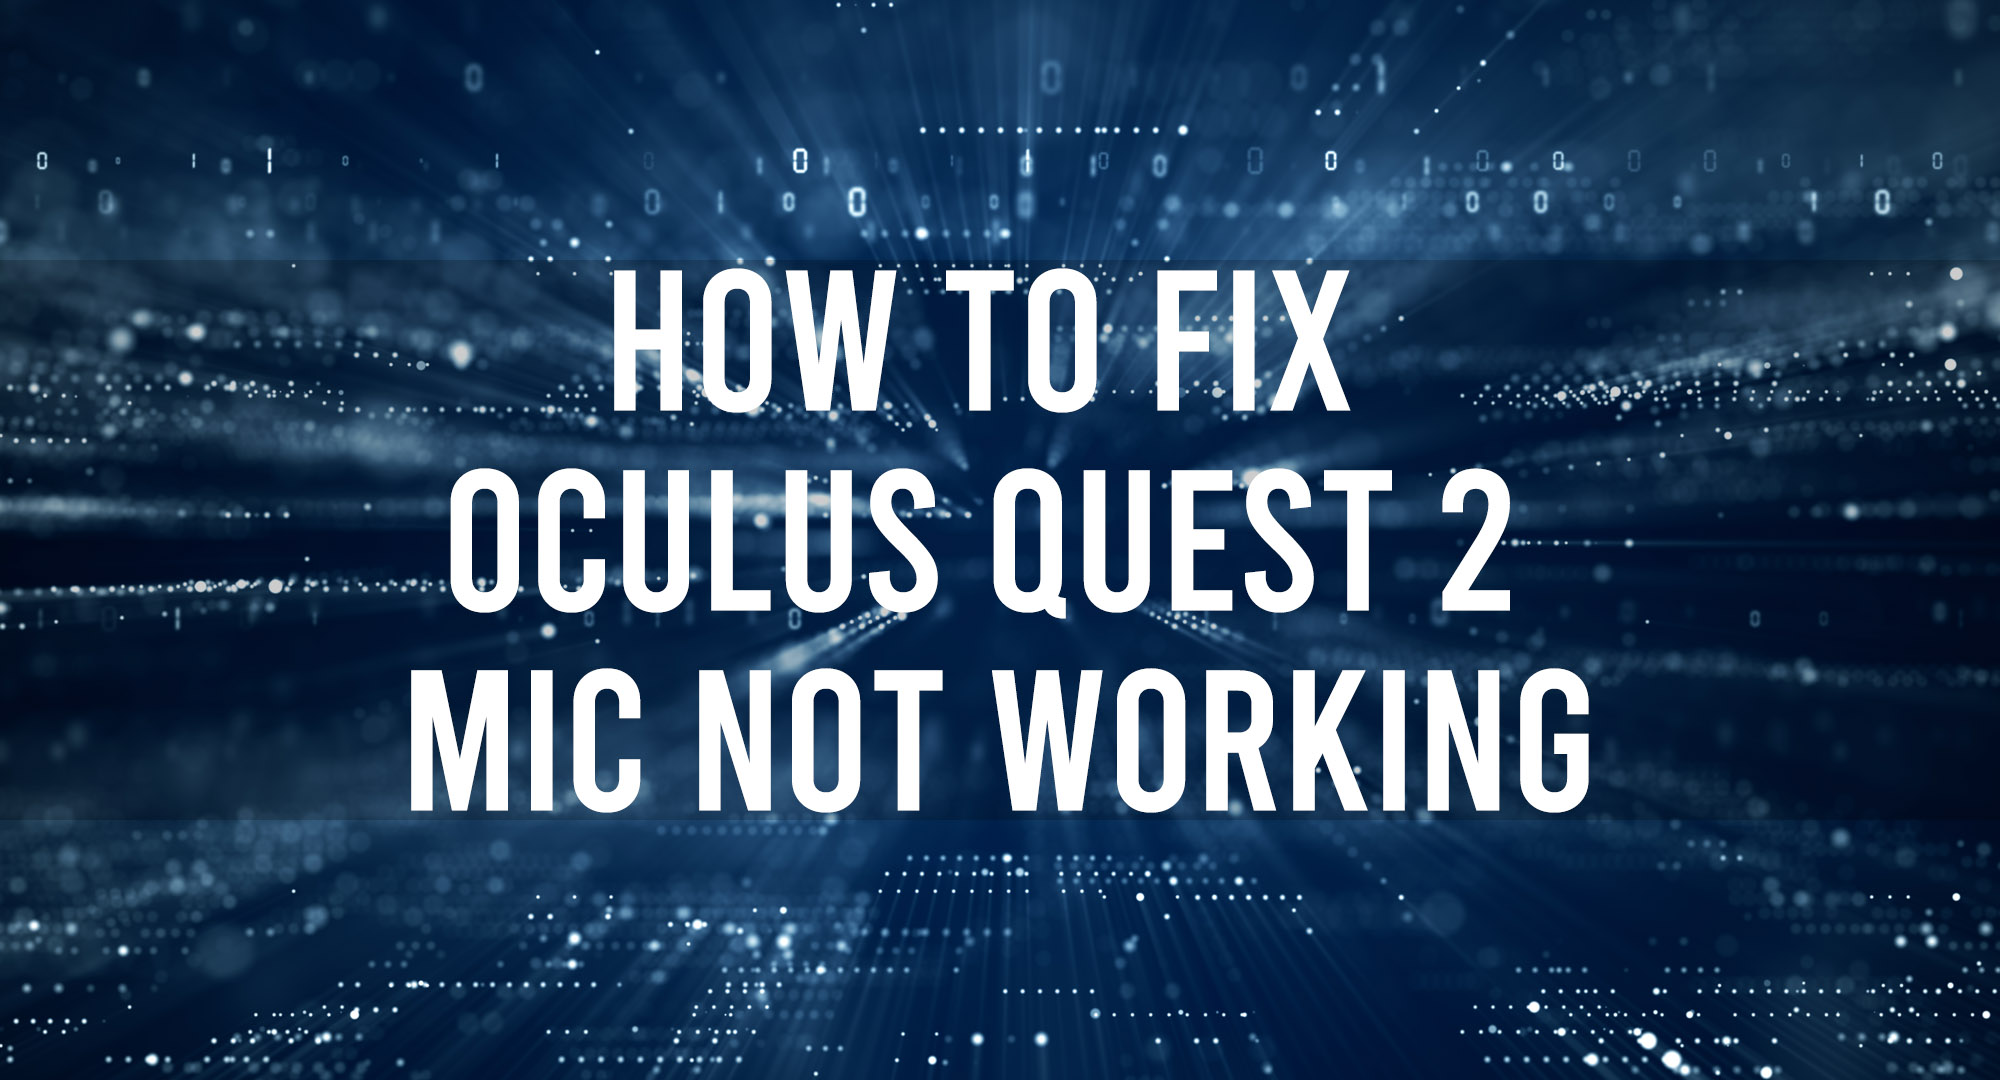 How to Fix Oculus Quest 2 Mic Not Working